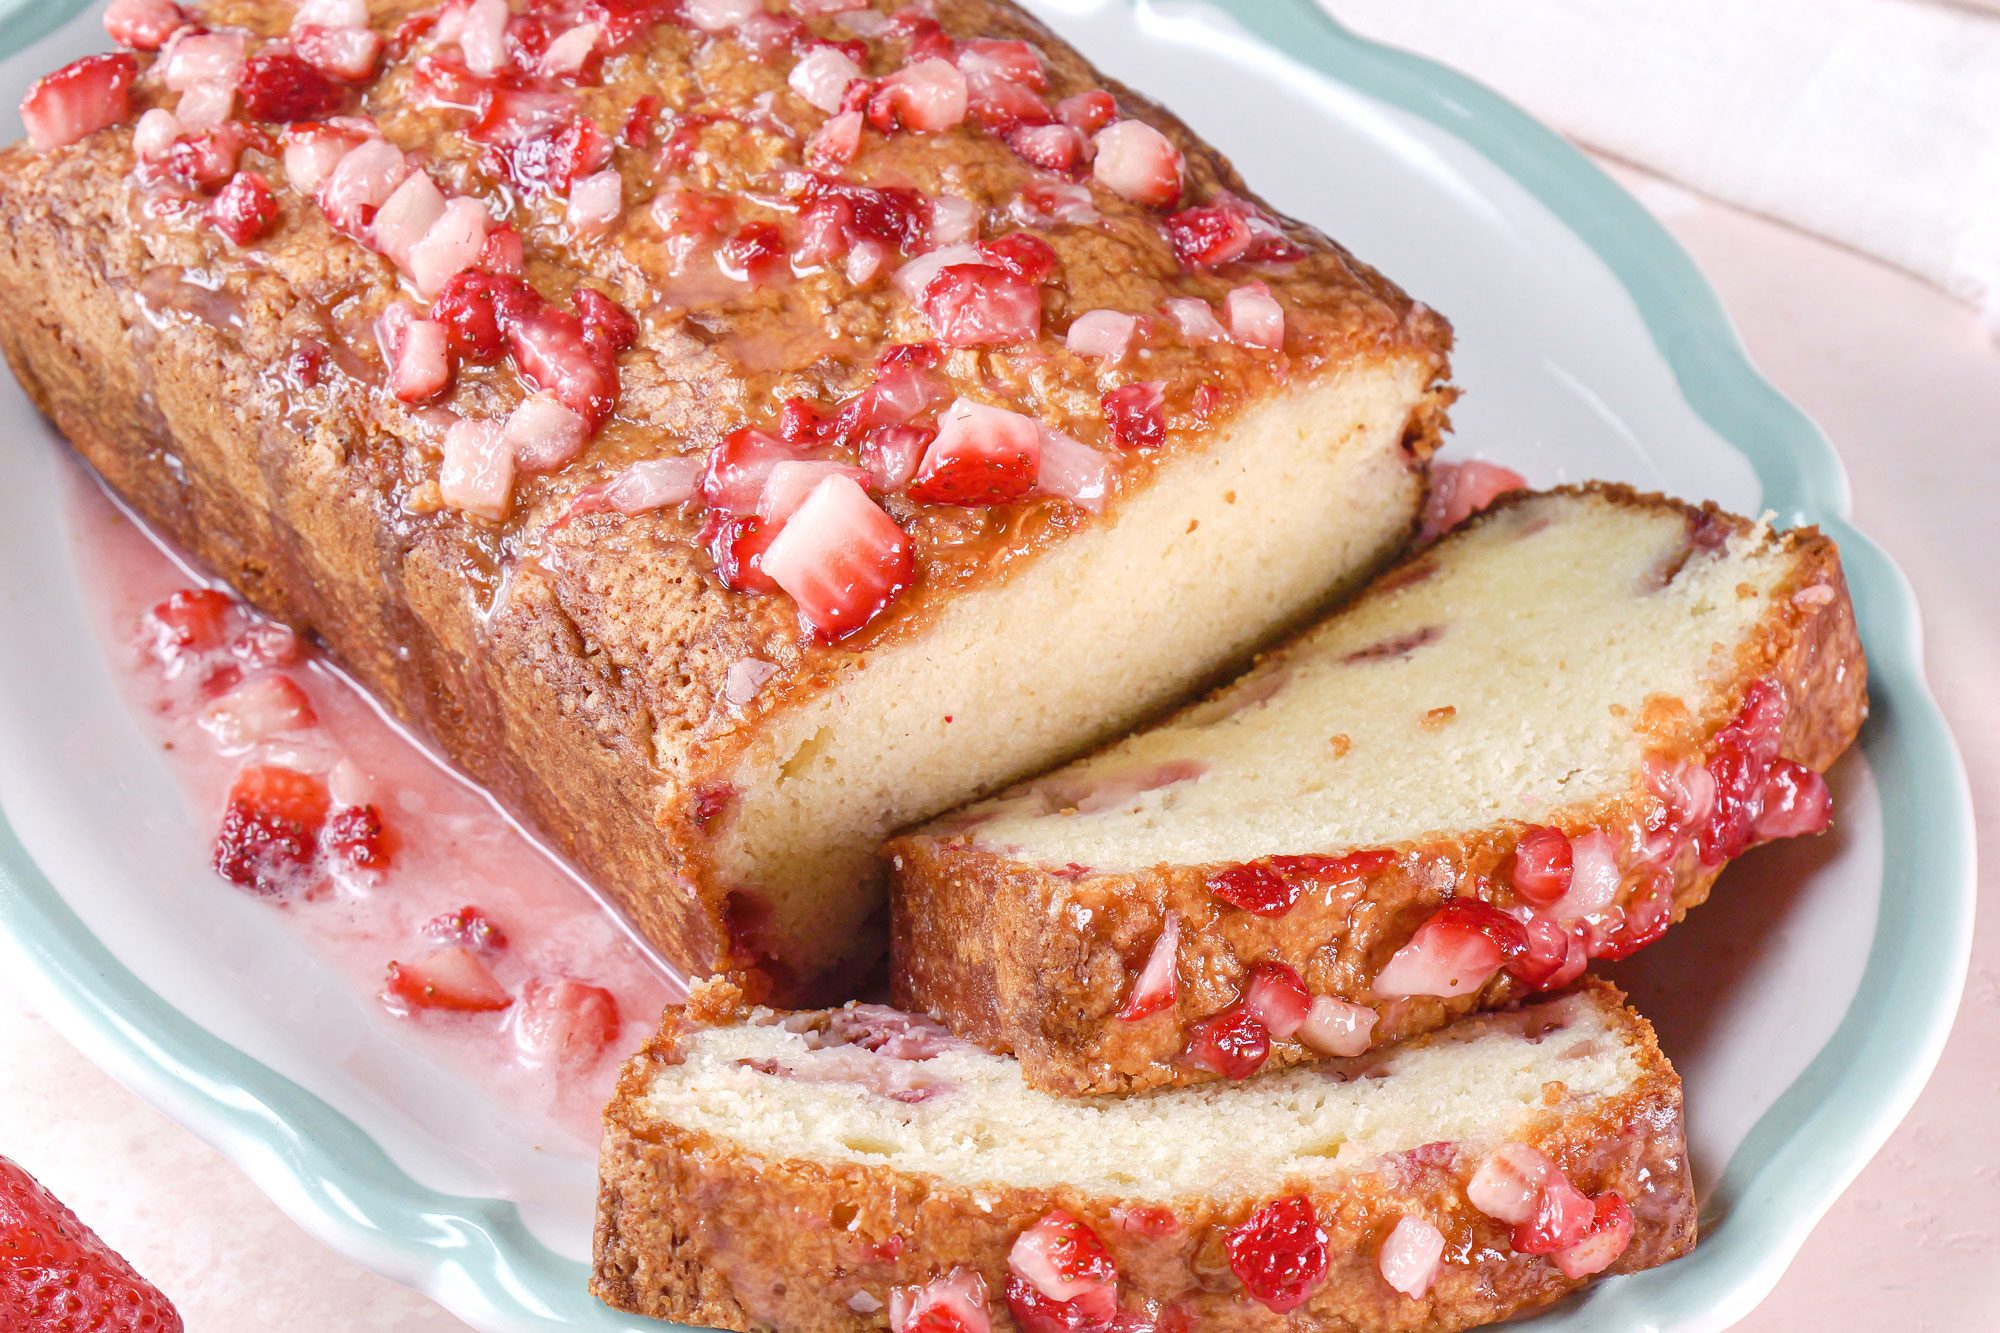 A delicious sliced loaf of Strawberry Pound Cake on a plate